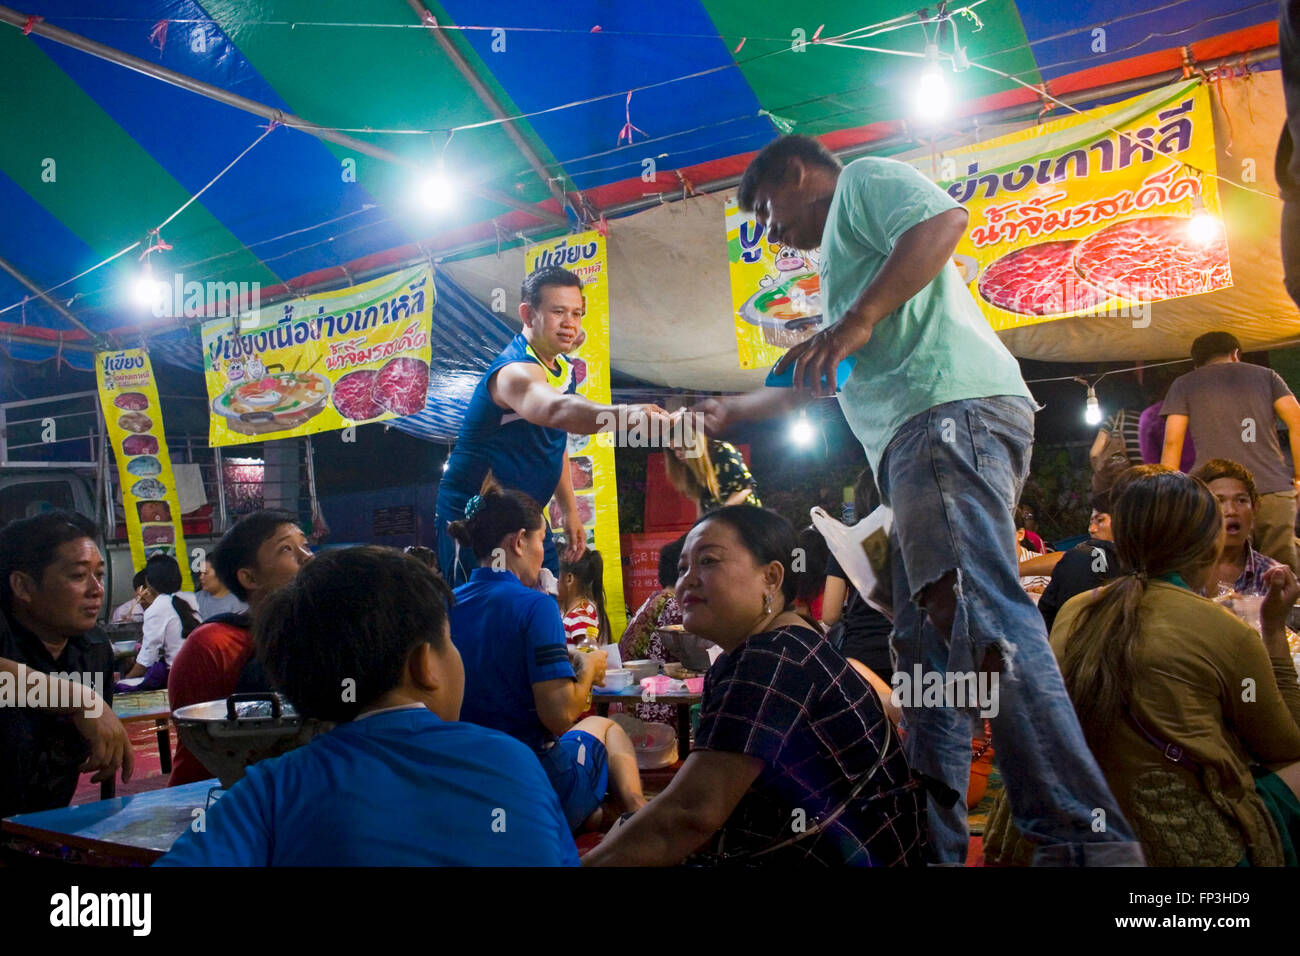 Cambodian people are gathered to eat food from Thailand at a street fair in Kampong Cham, Cambodia. Stock Photo